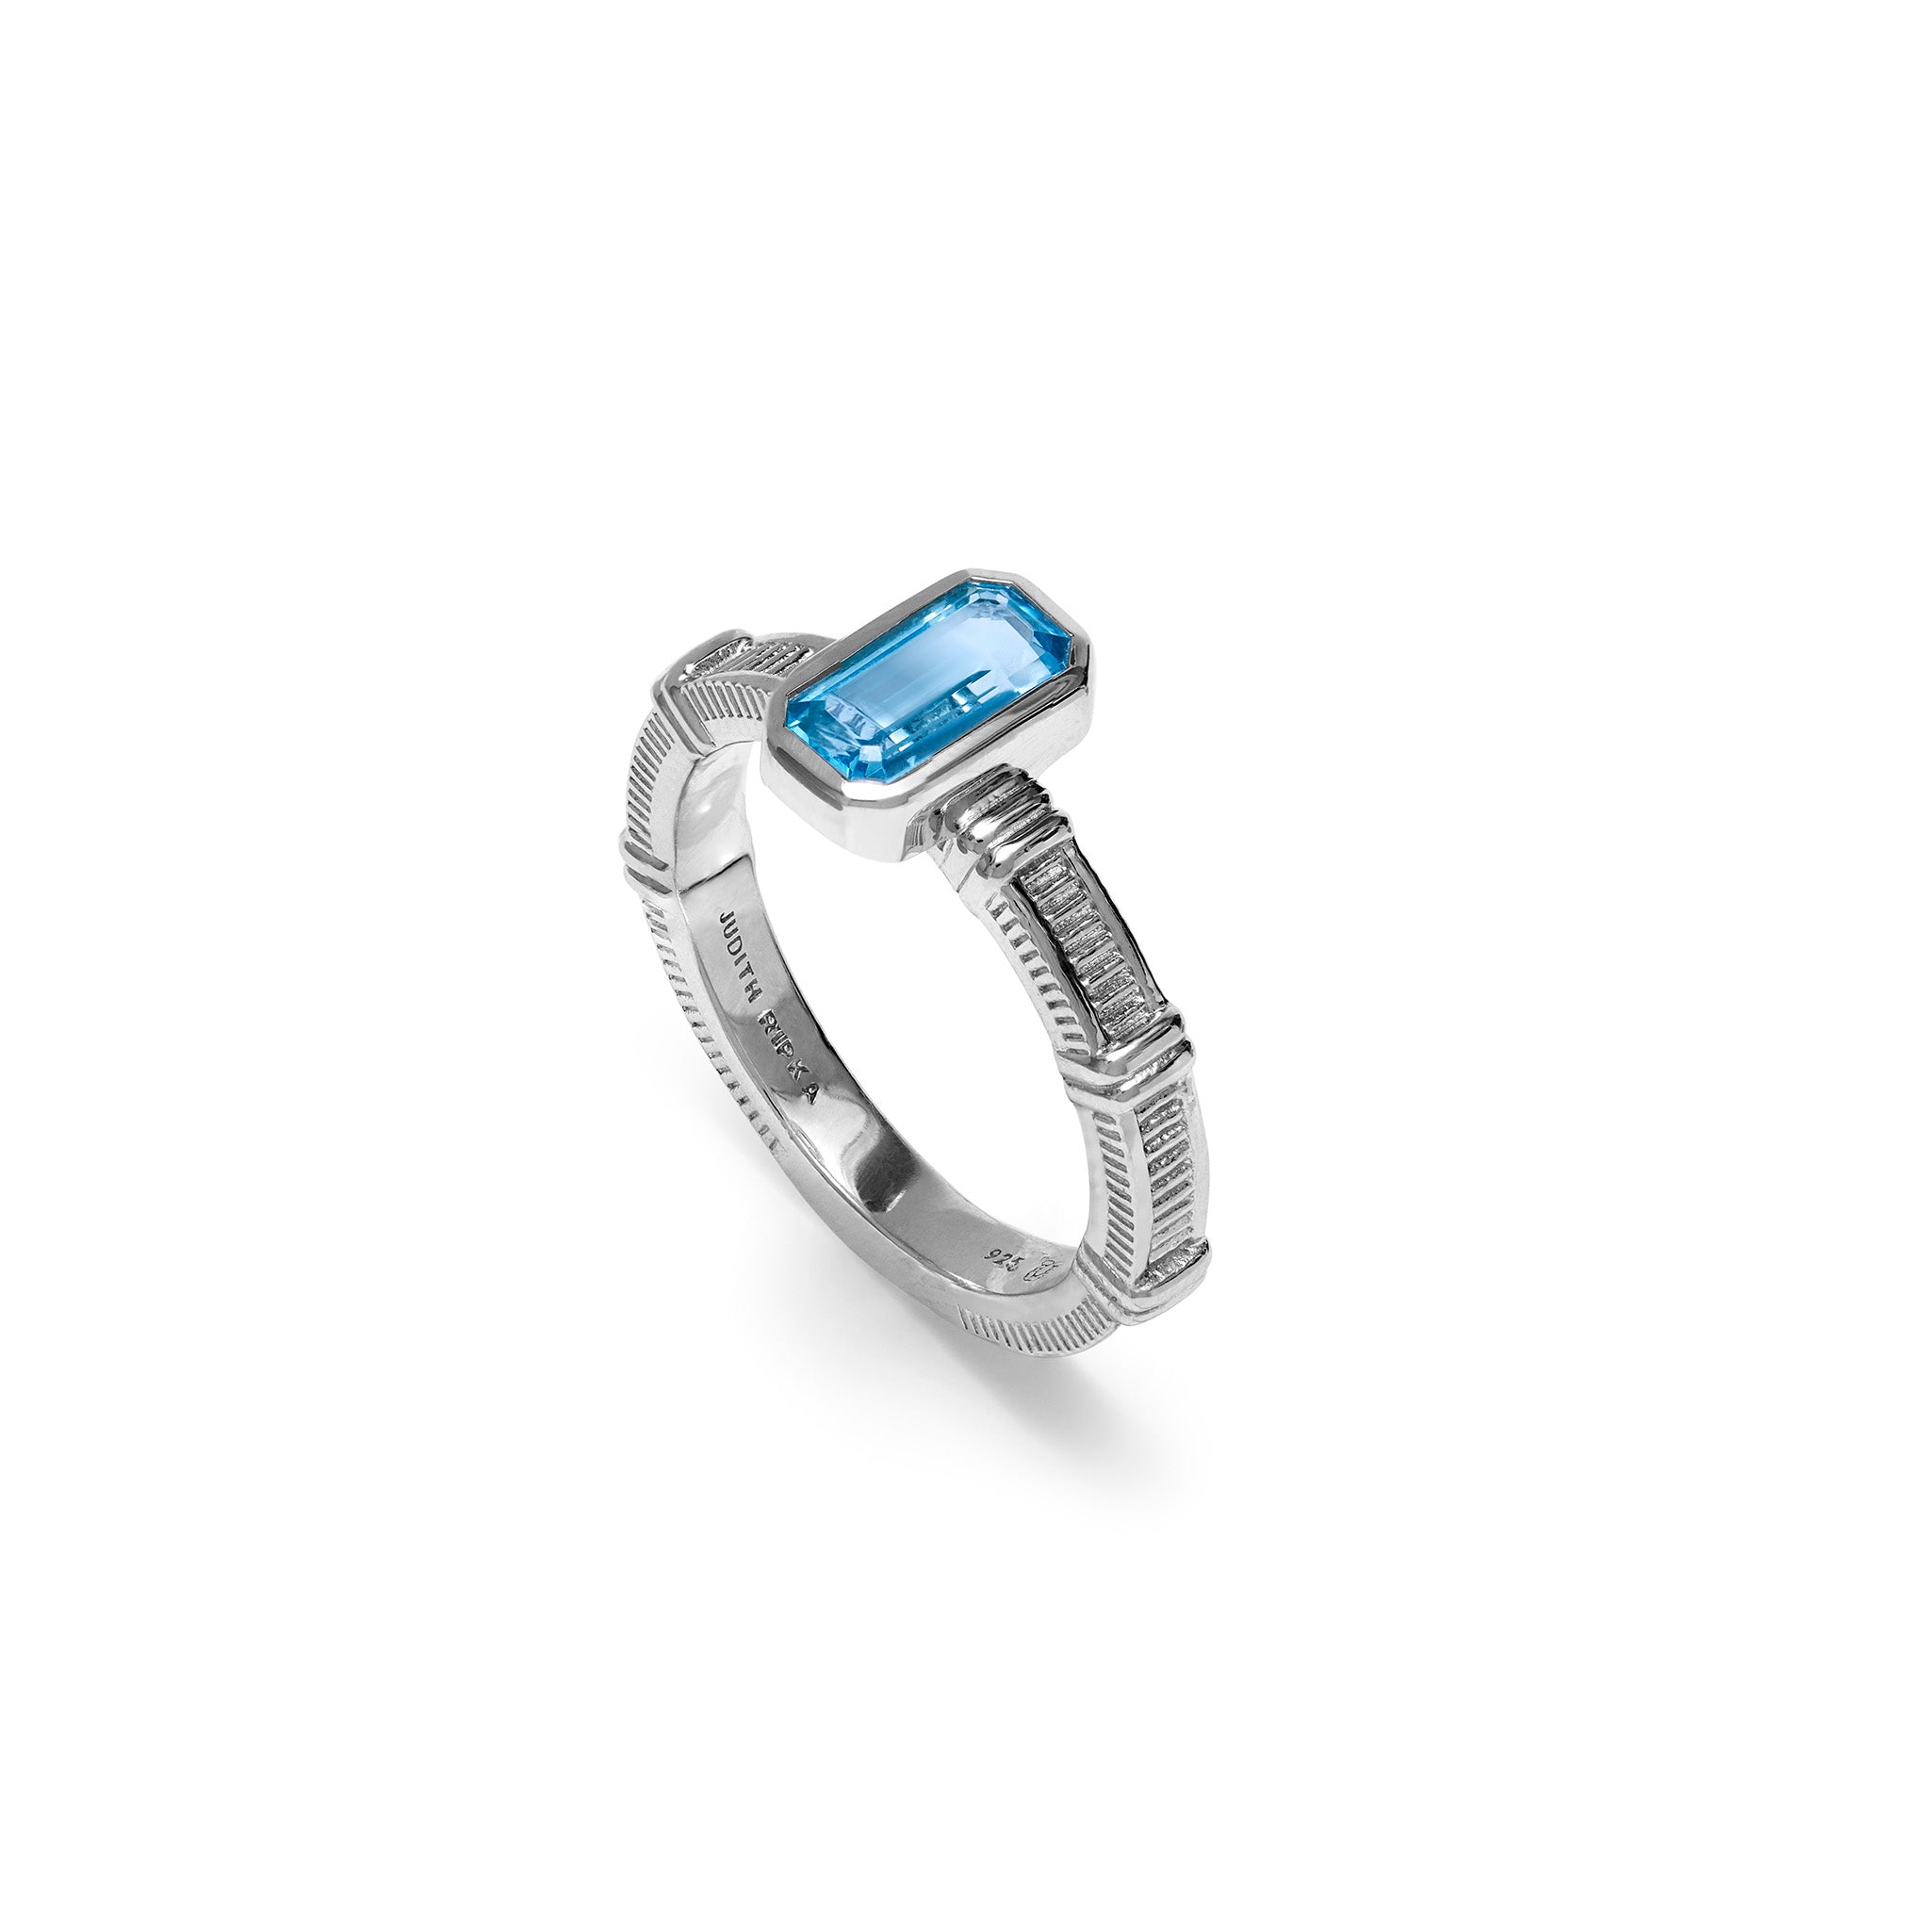 Adrienne Stack Ring with Swiss Blue Topaz